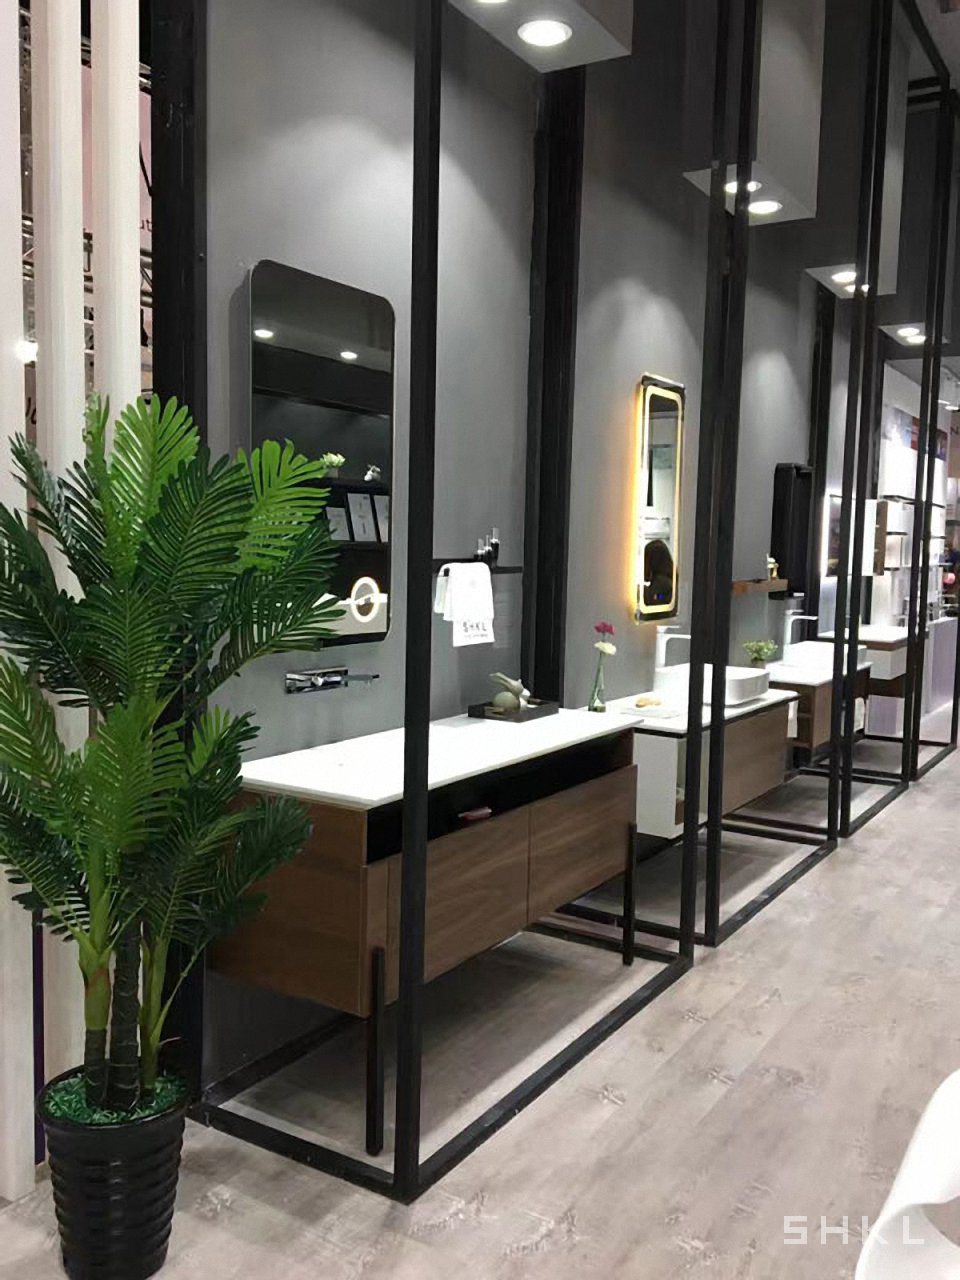 KBIS 2018, SHKL attended KBIS the 2nd time, leading the trend of bathroom vanities 7